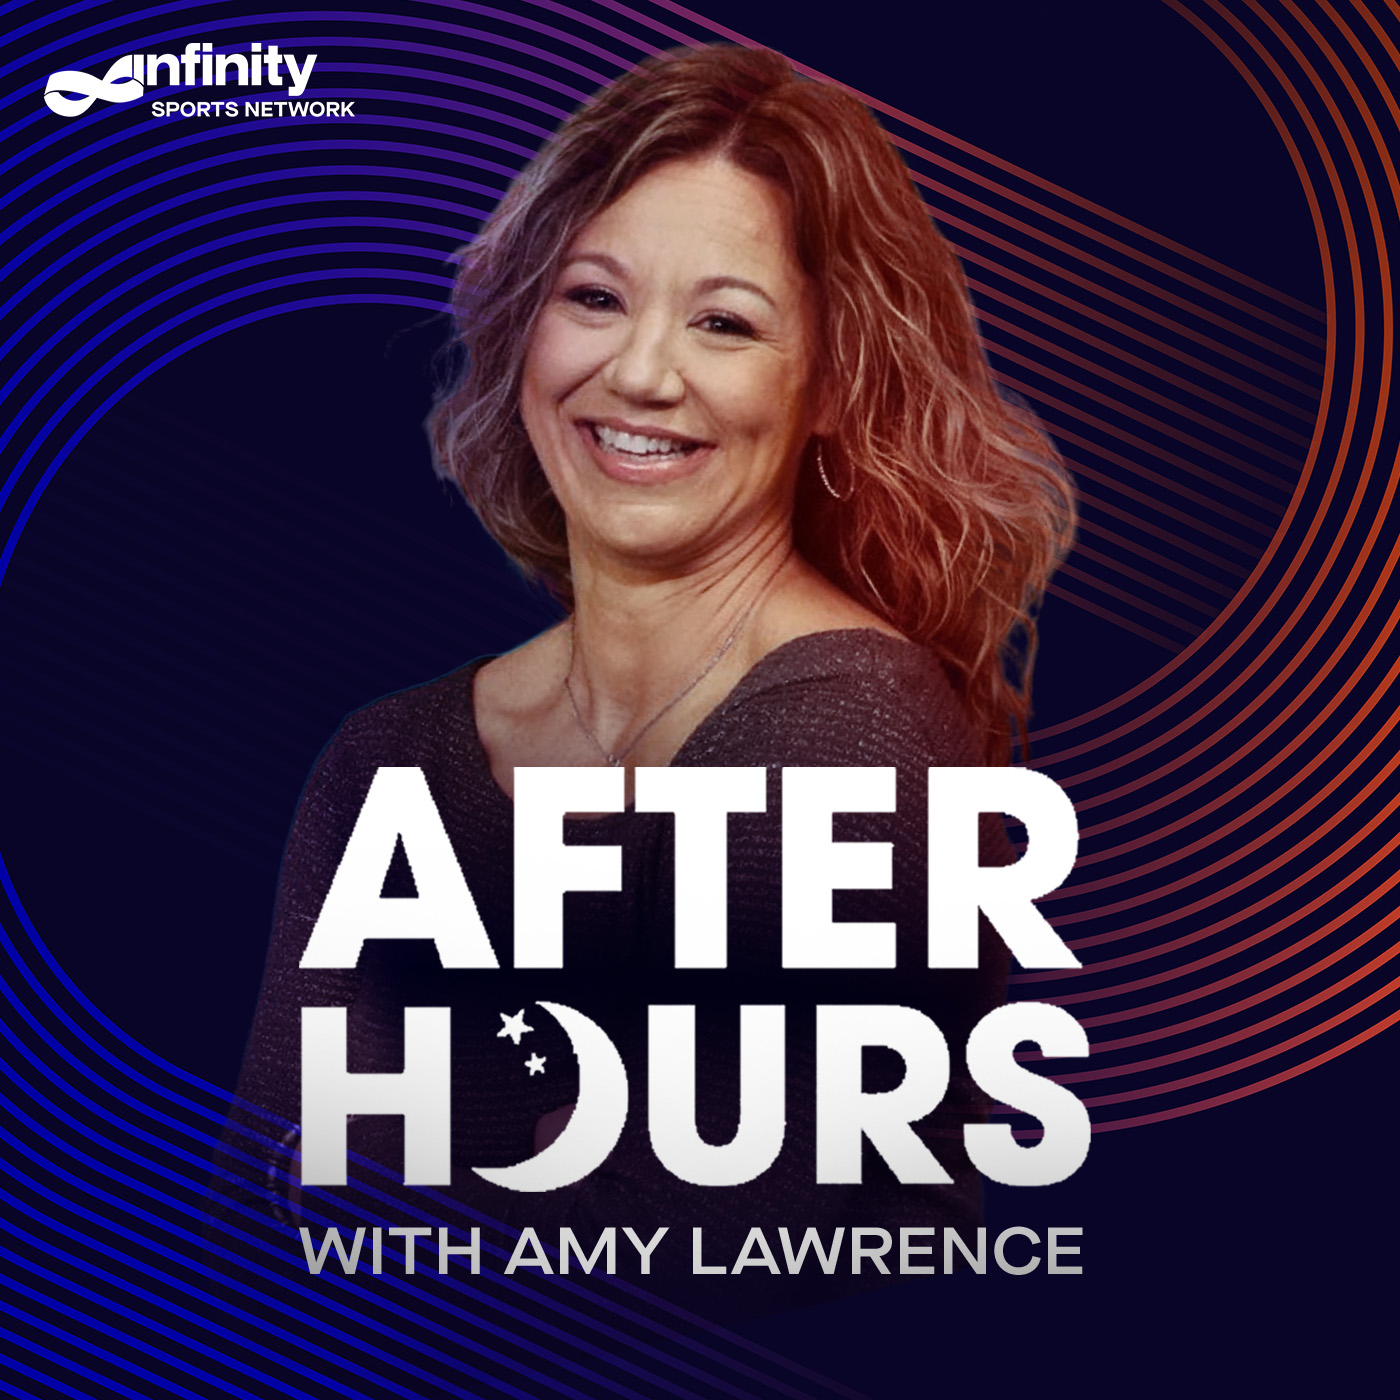 10-15-21 After Hours with Amy Lawrence PODCAST: Hour 1